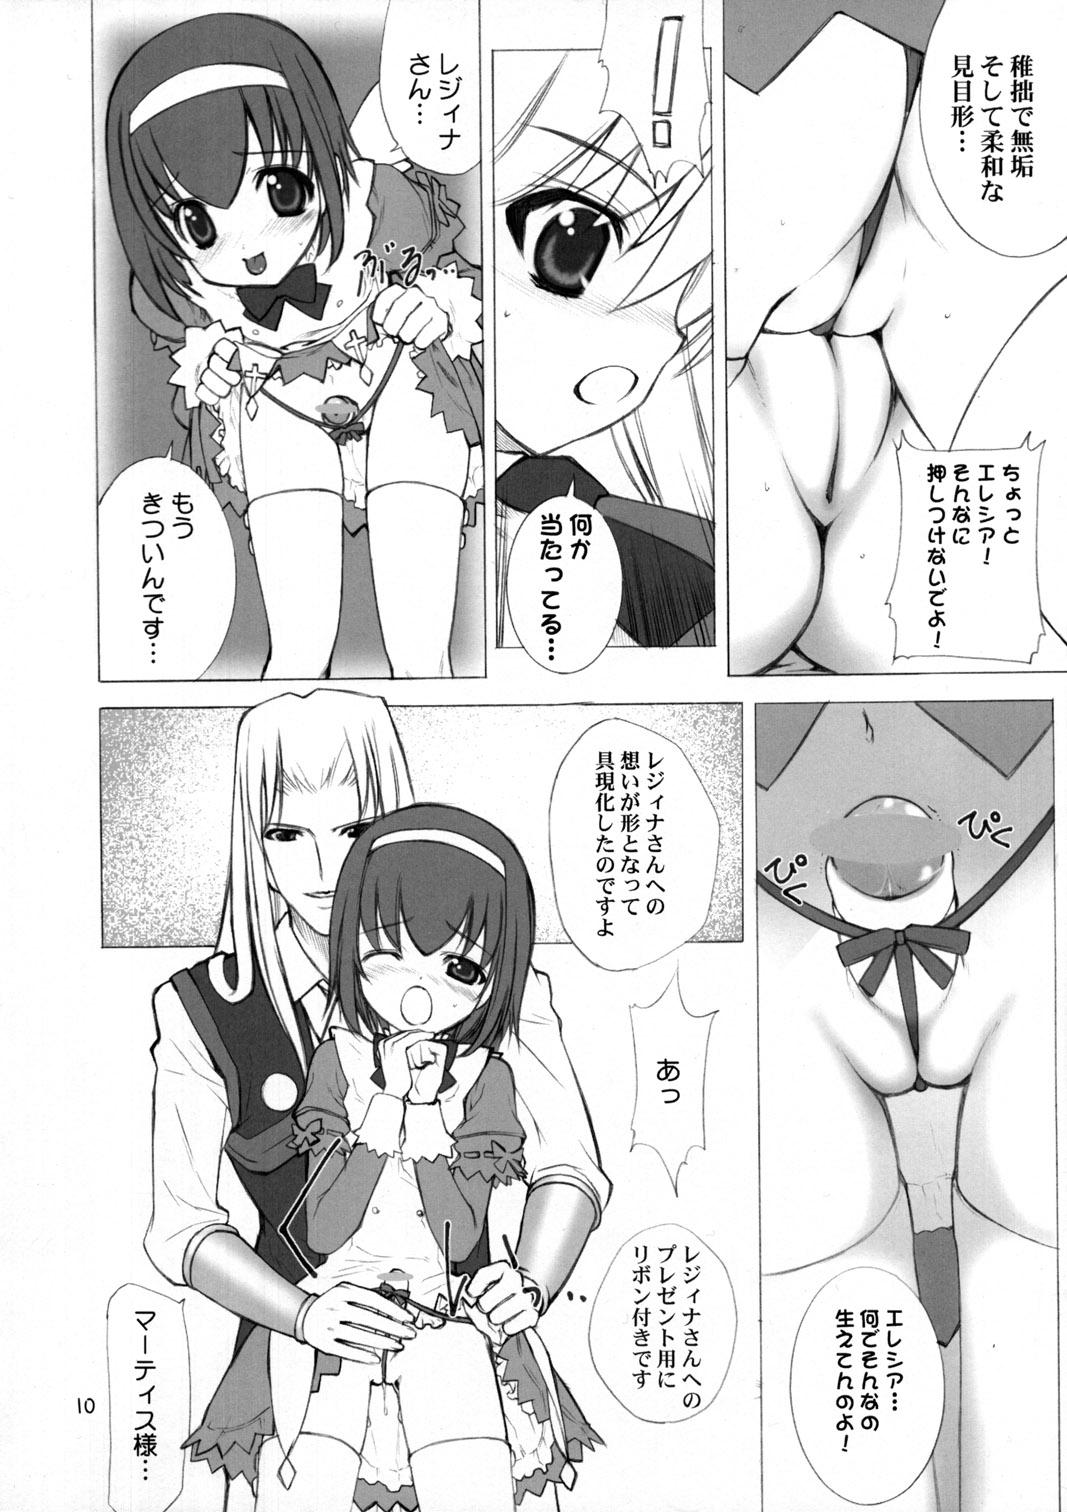 Sex Toy IRAB - Dalk gaiden Bigcock - Page 9